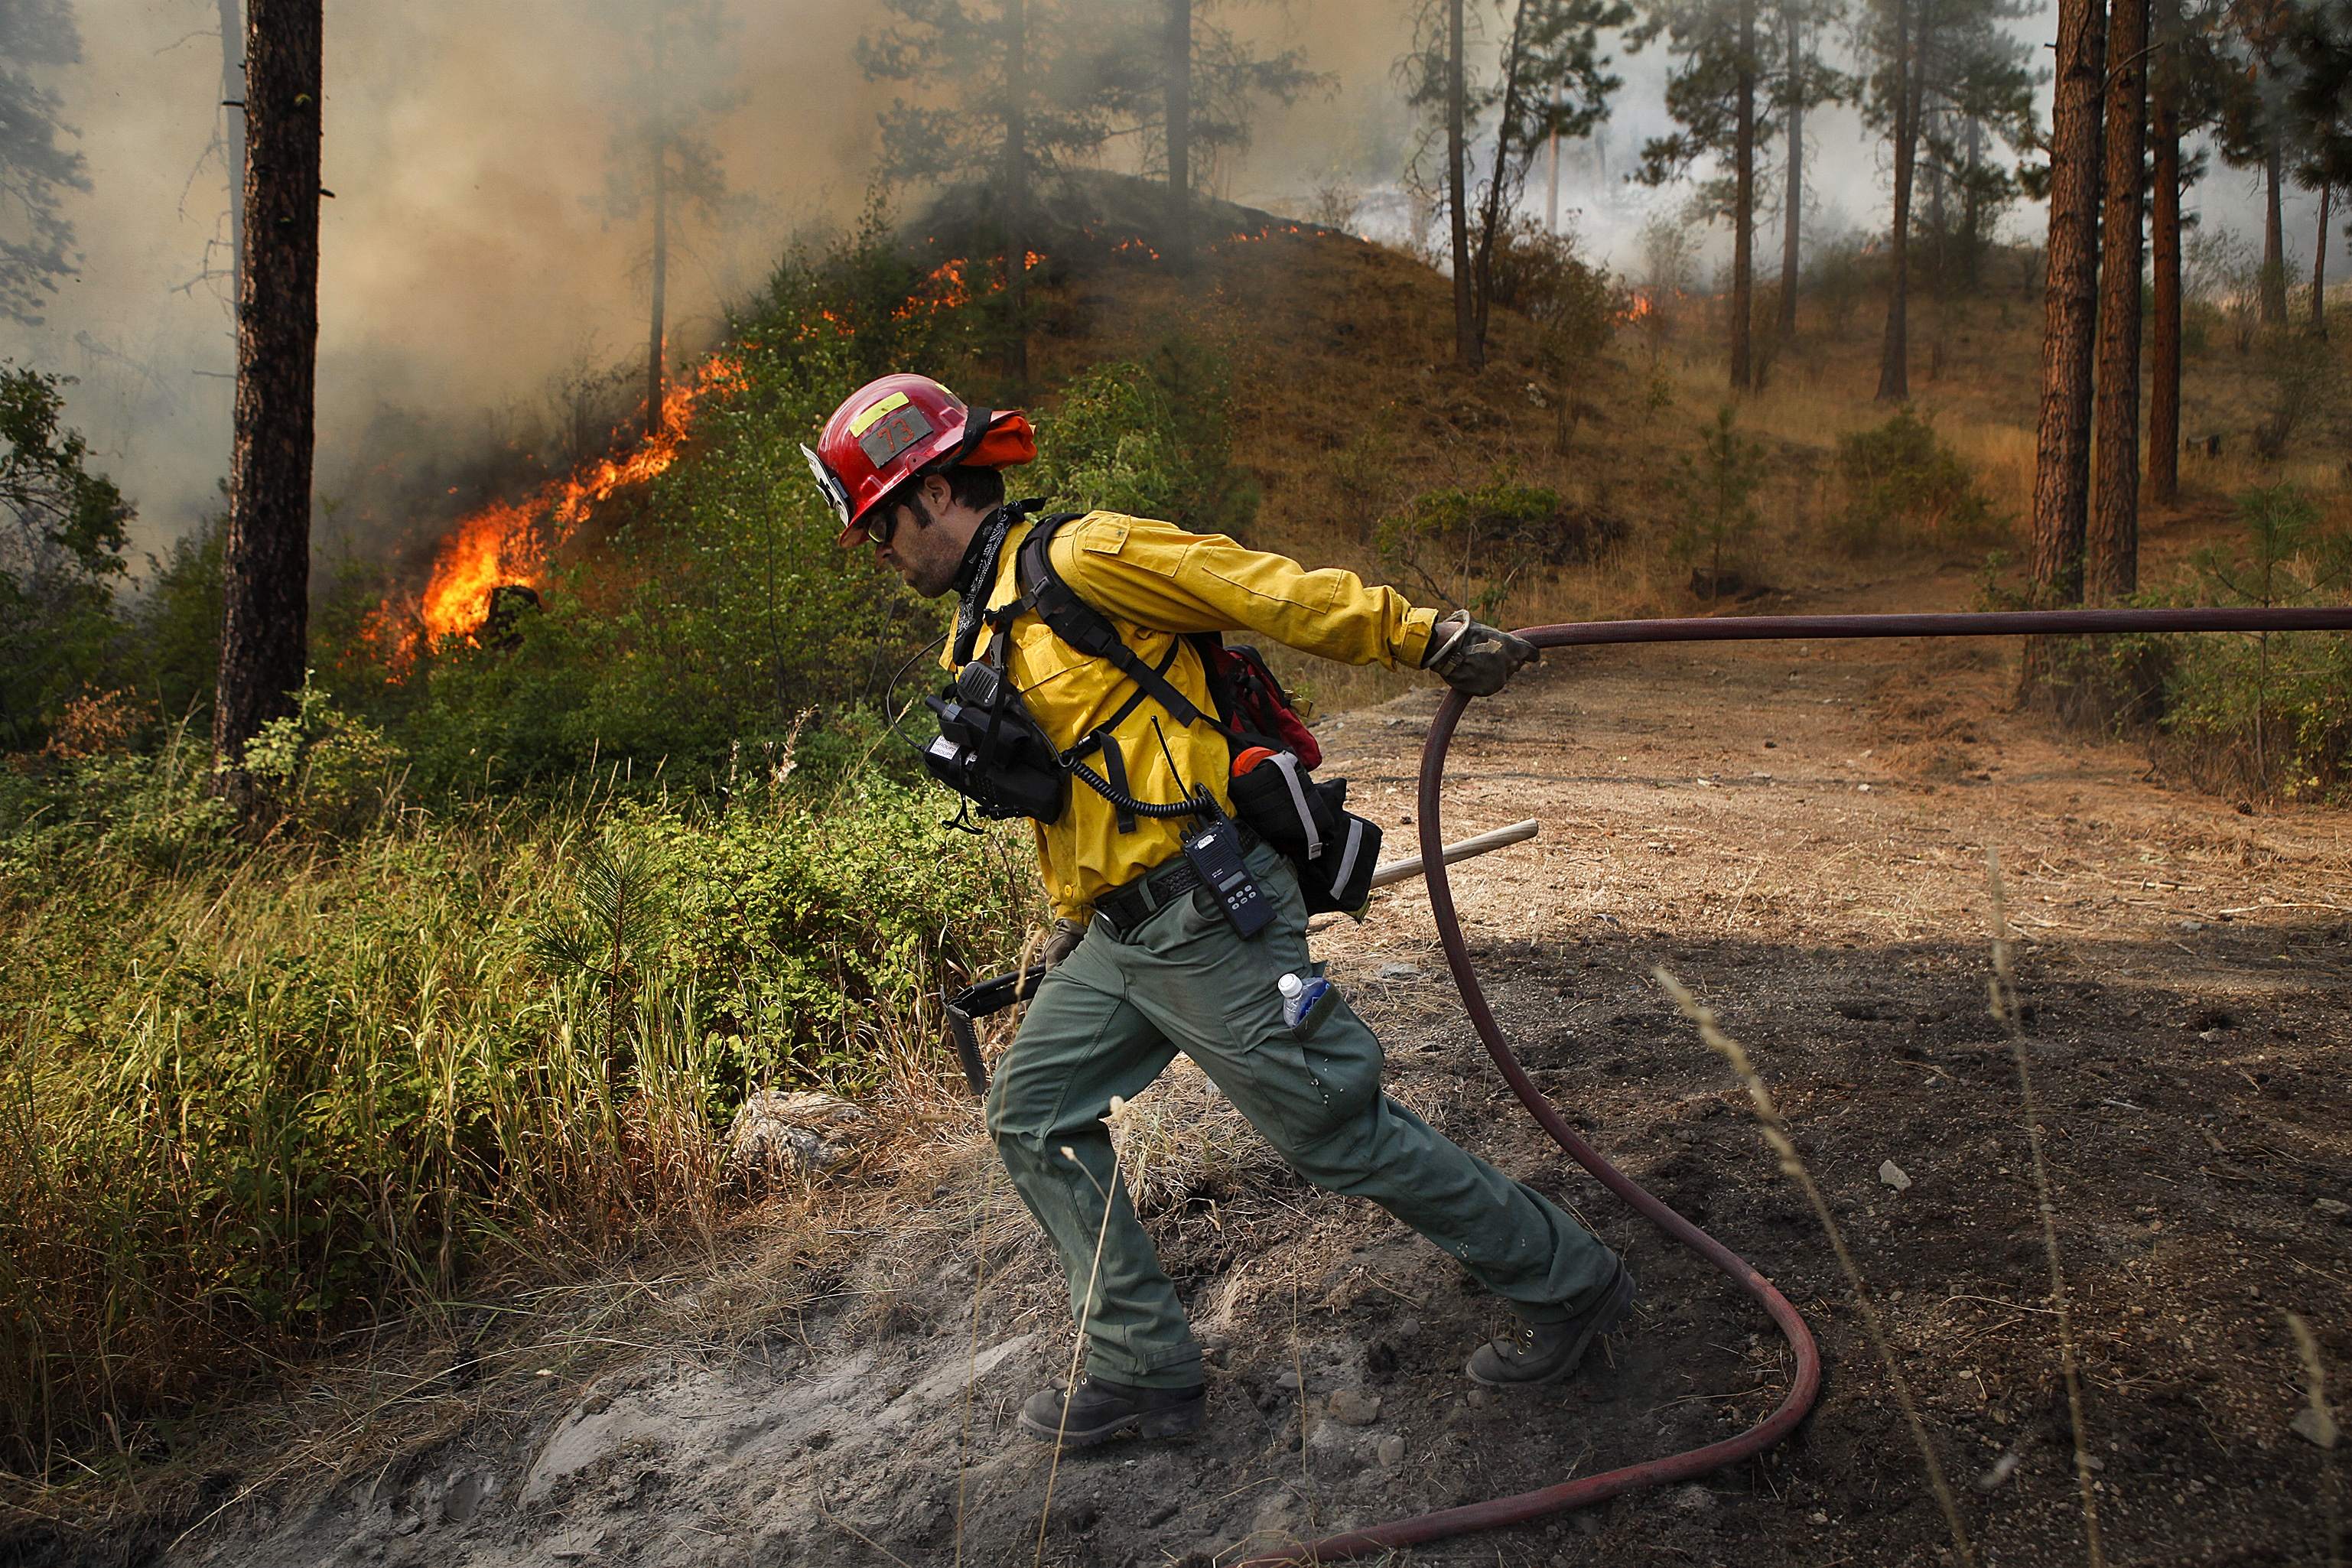 The same tech you use to map your run could keep firefighters safe |  Crosscut